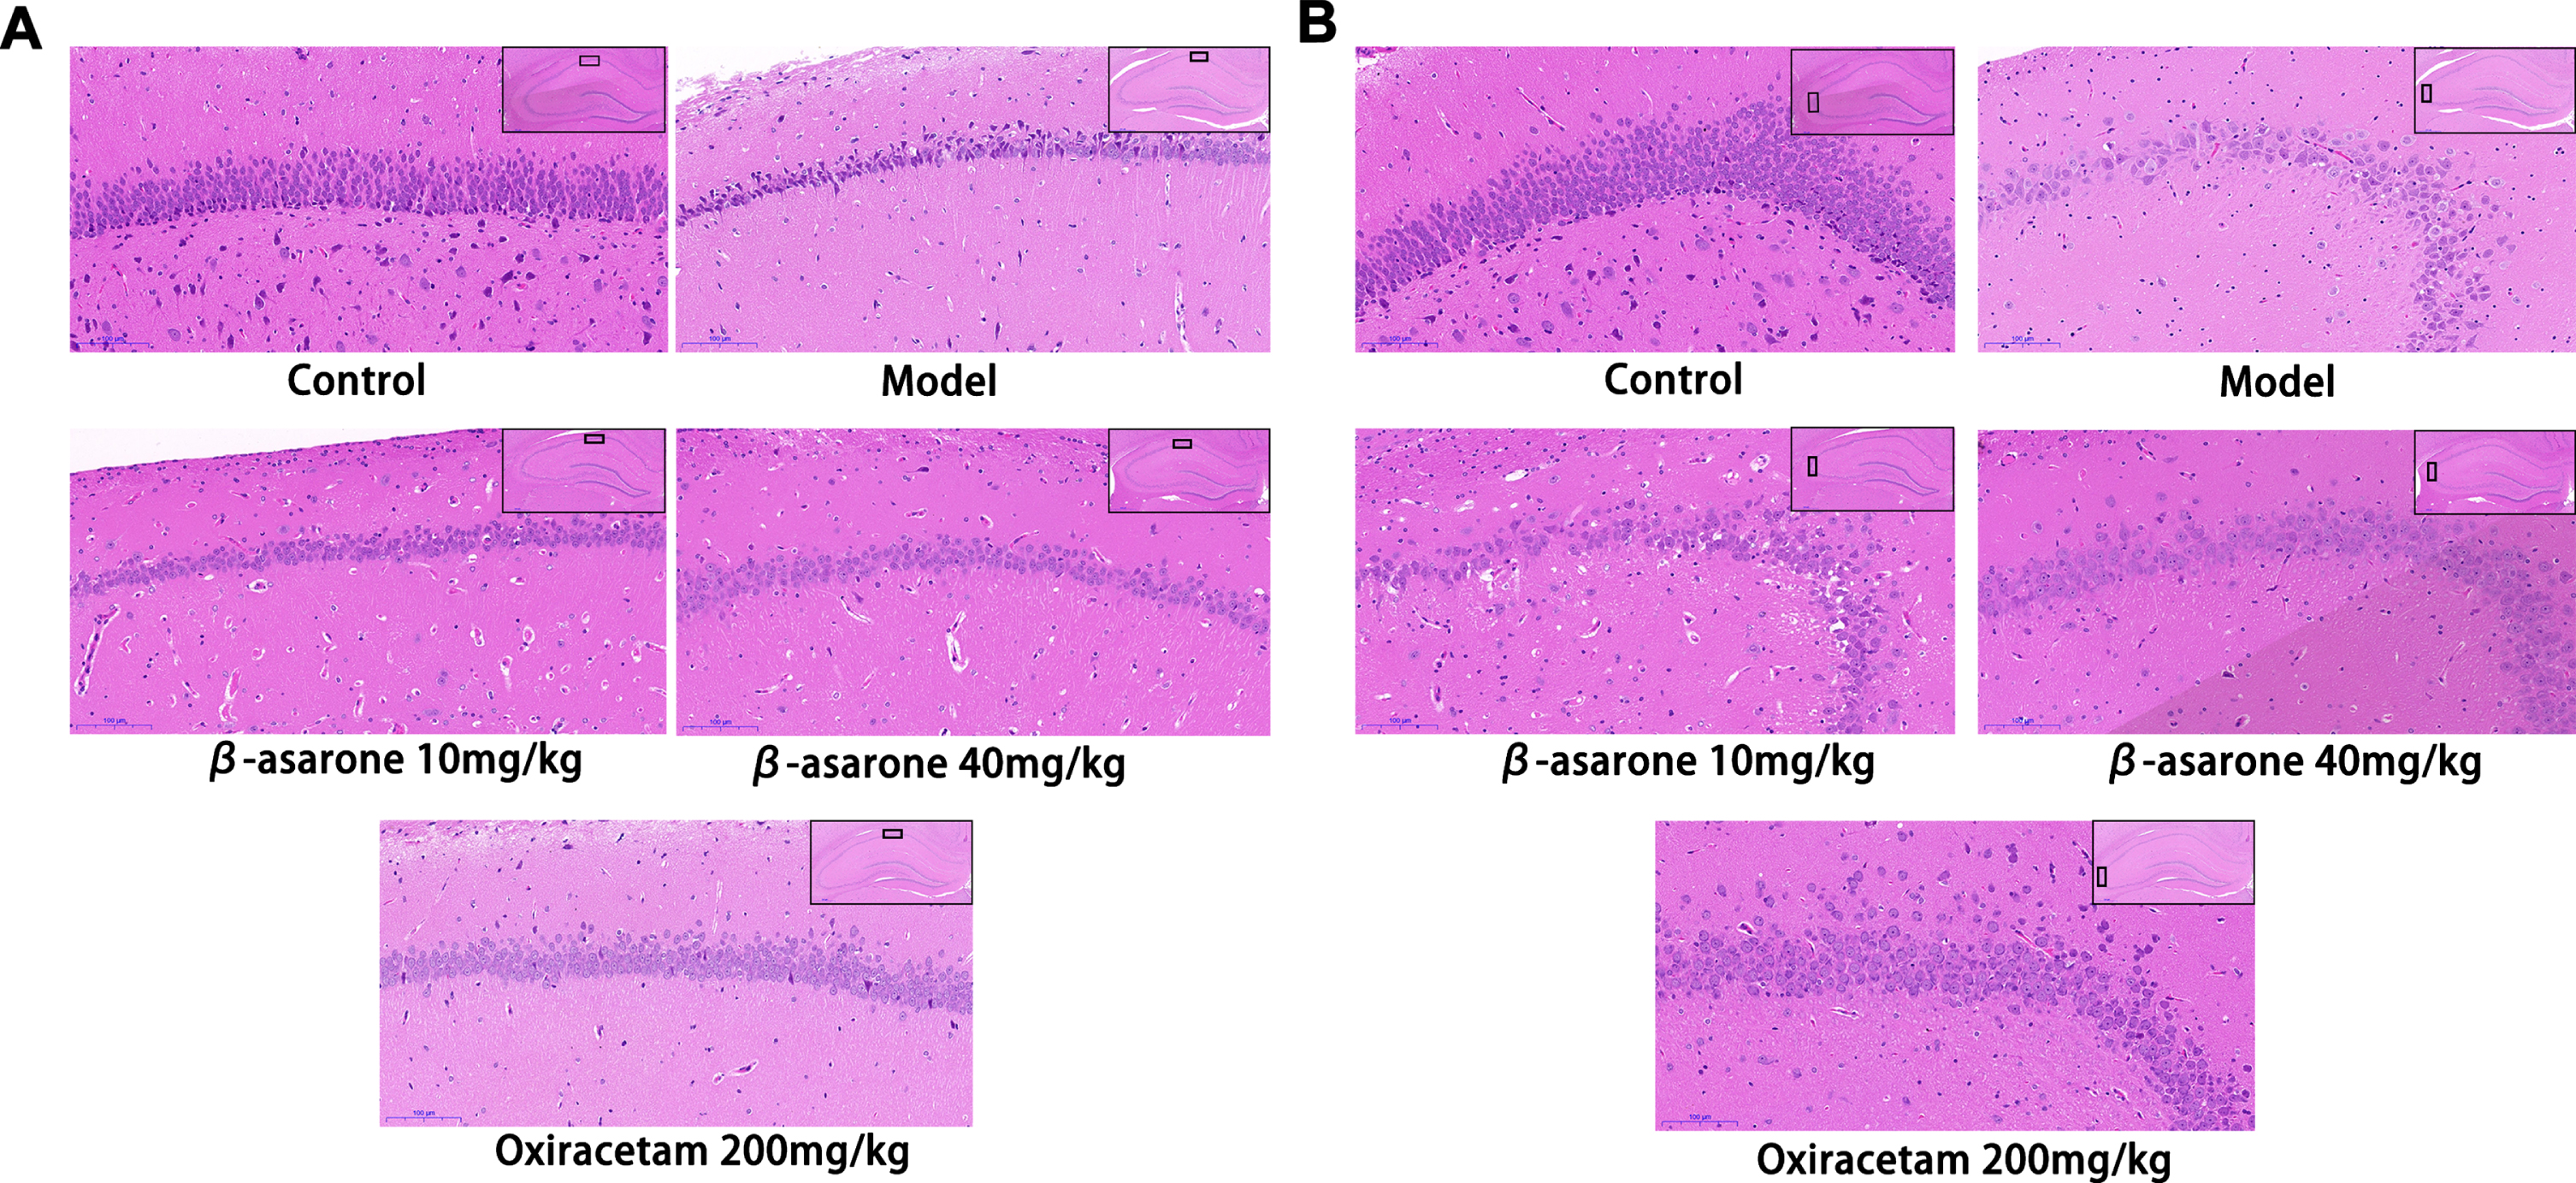 HE staining of pathological sections of rats’ hippocampus. The expression of neurons in CA1 (A) and CA3 (B) areas in different groups. In the control group, neurons in CA1 and CA3 areas were neatly arranged, dense and evenly distributed, with clear cell outlines and obvious rounded nuclei. The number of neurons in the CA1 and CA3 regions of the model group was significantly reduced, with abnormal morphology and disordered arrangement. The cells in the CA1 and CA3 areas of the β-asarone group and the positive drug group were arranged neatly and evenly, the cell outline was clearer, and the shape returned to normal.